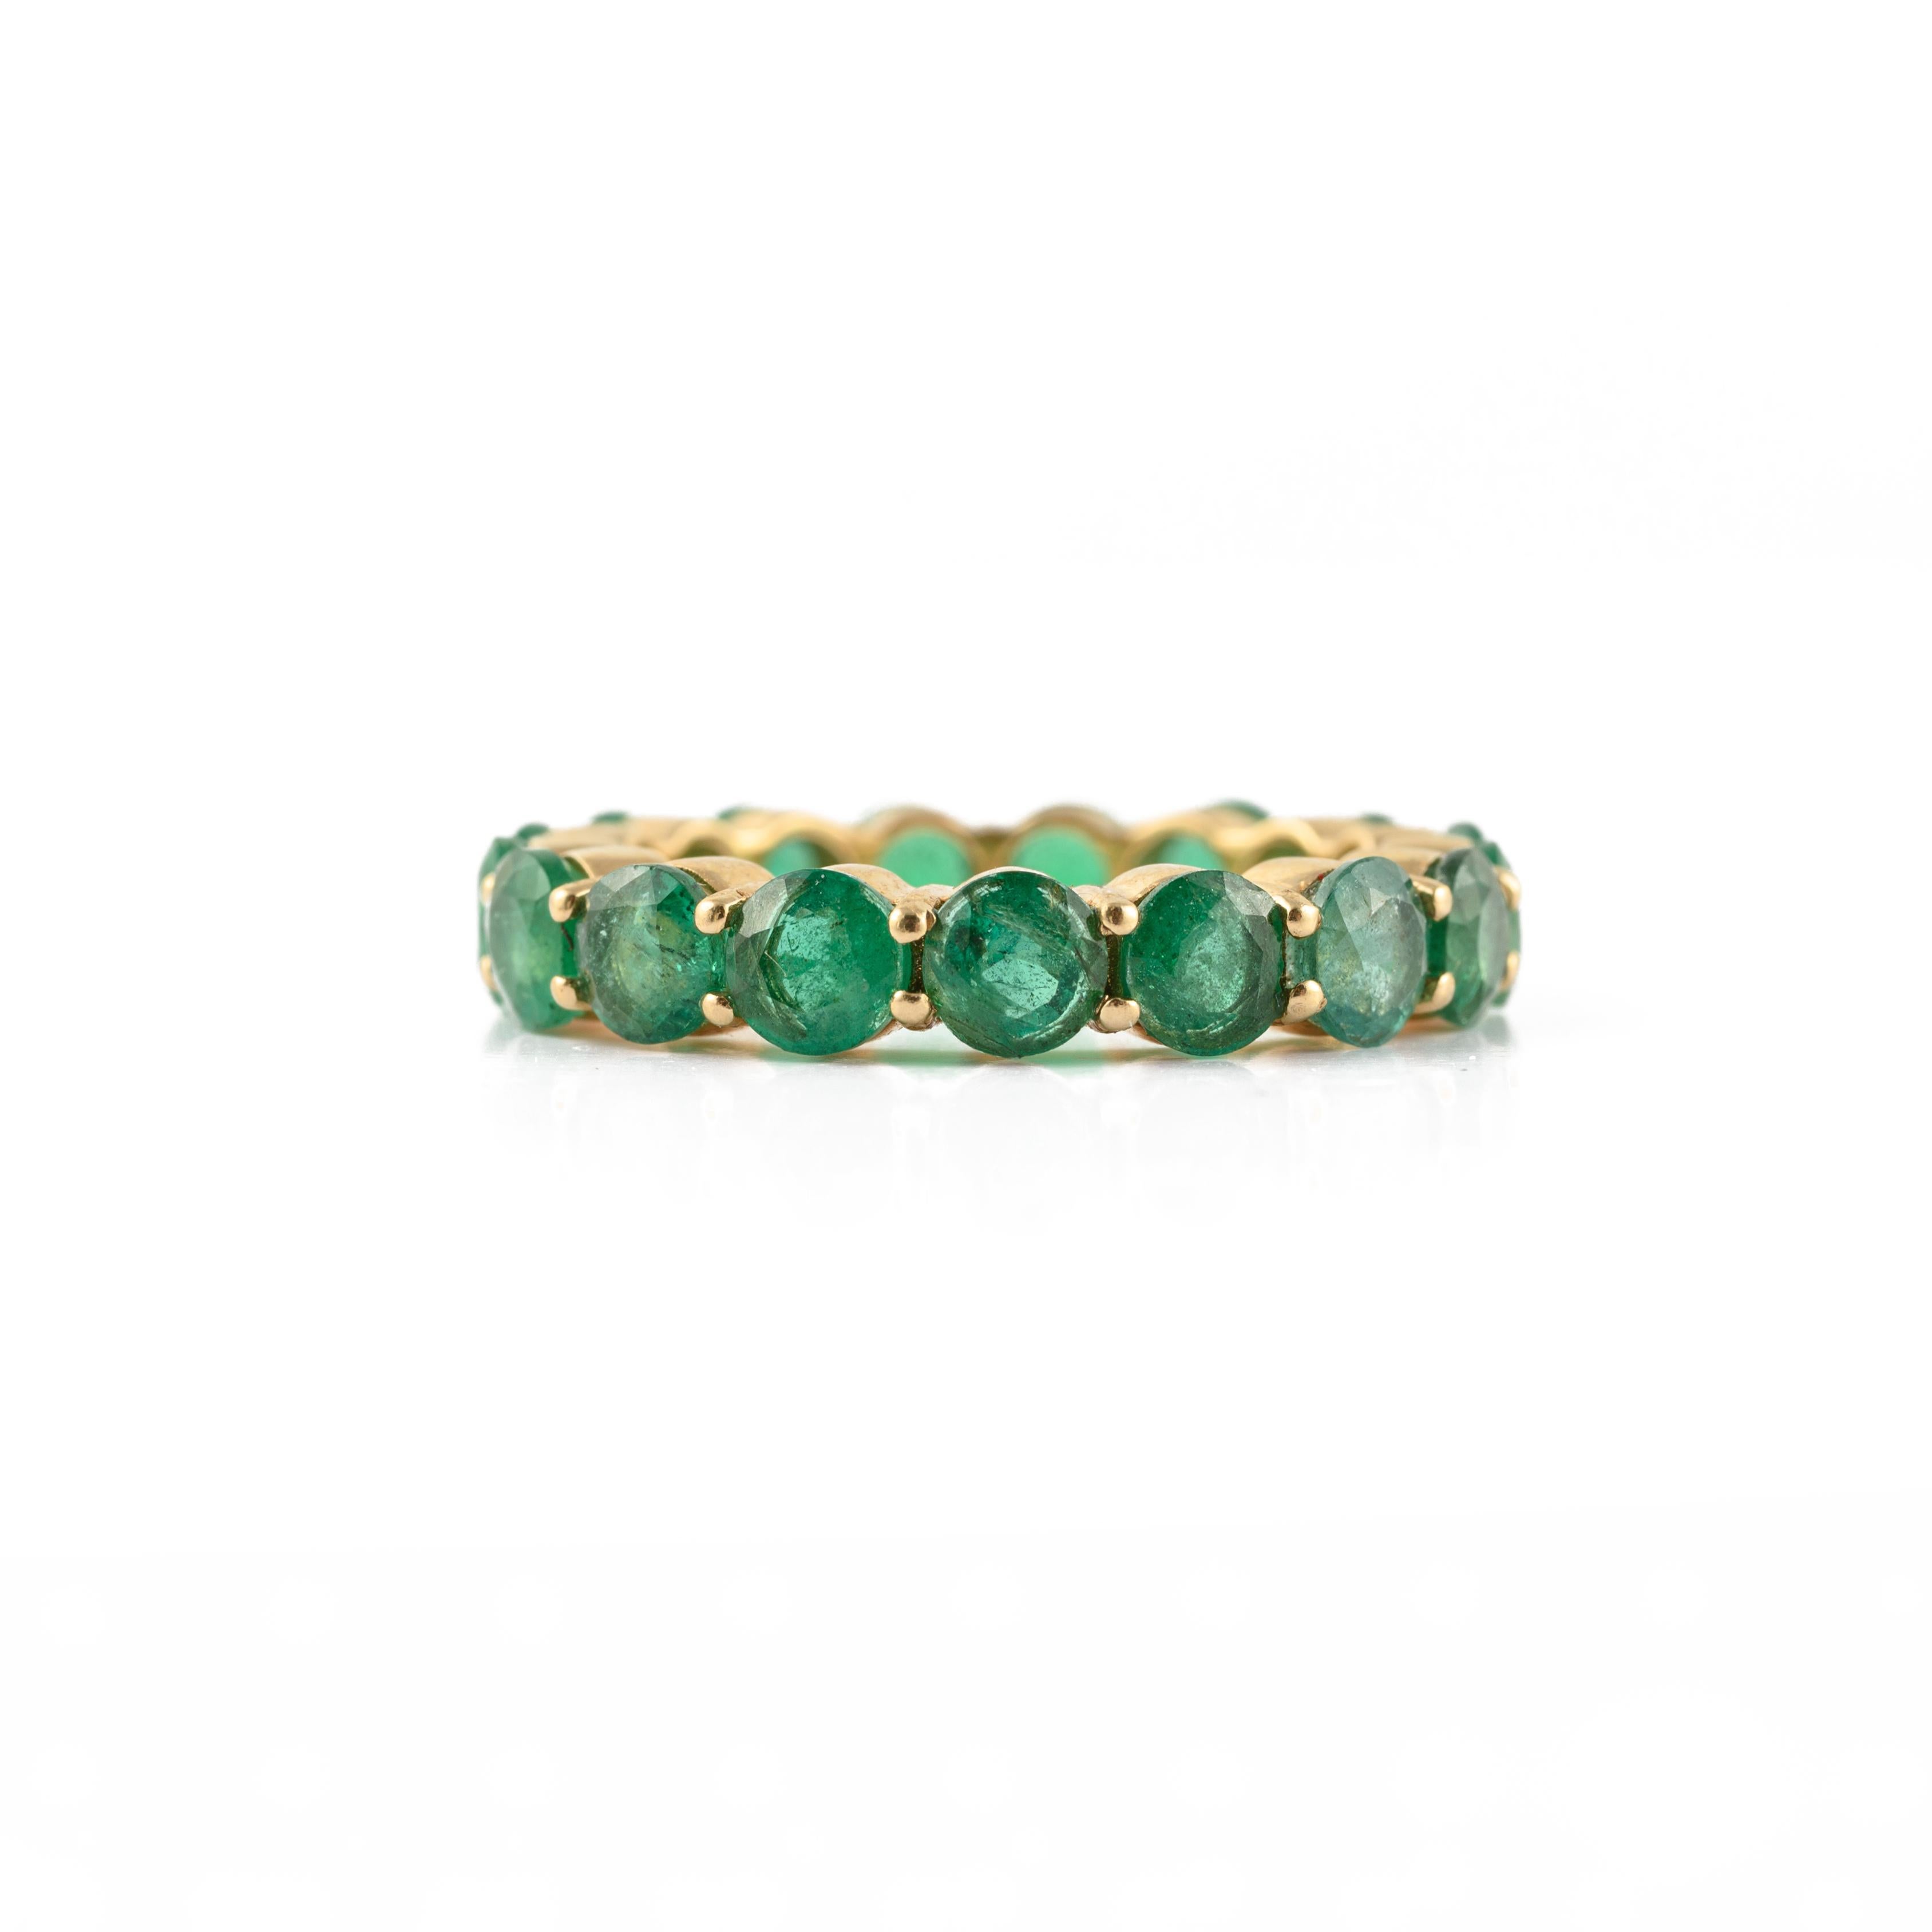 For Sale:  Stackable 14K Solid Yellow Gold 4.26 ct Natural Emerald Eternity Band Ring 8